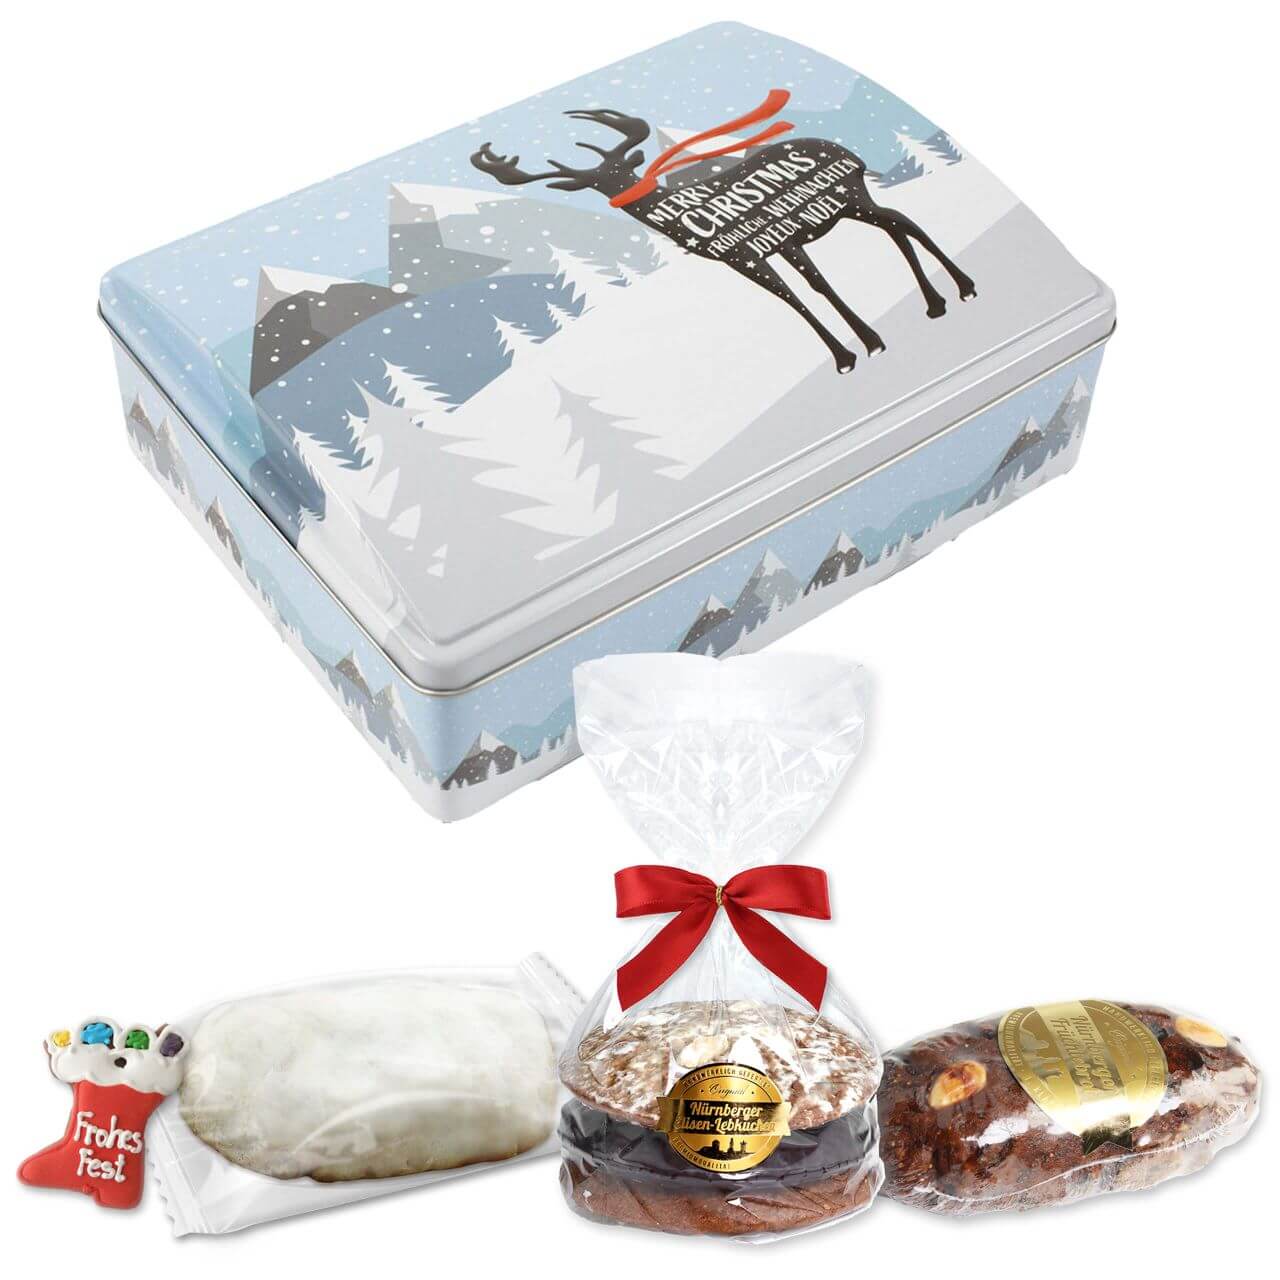 Winter landscape gift chest with reindeer